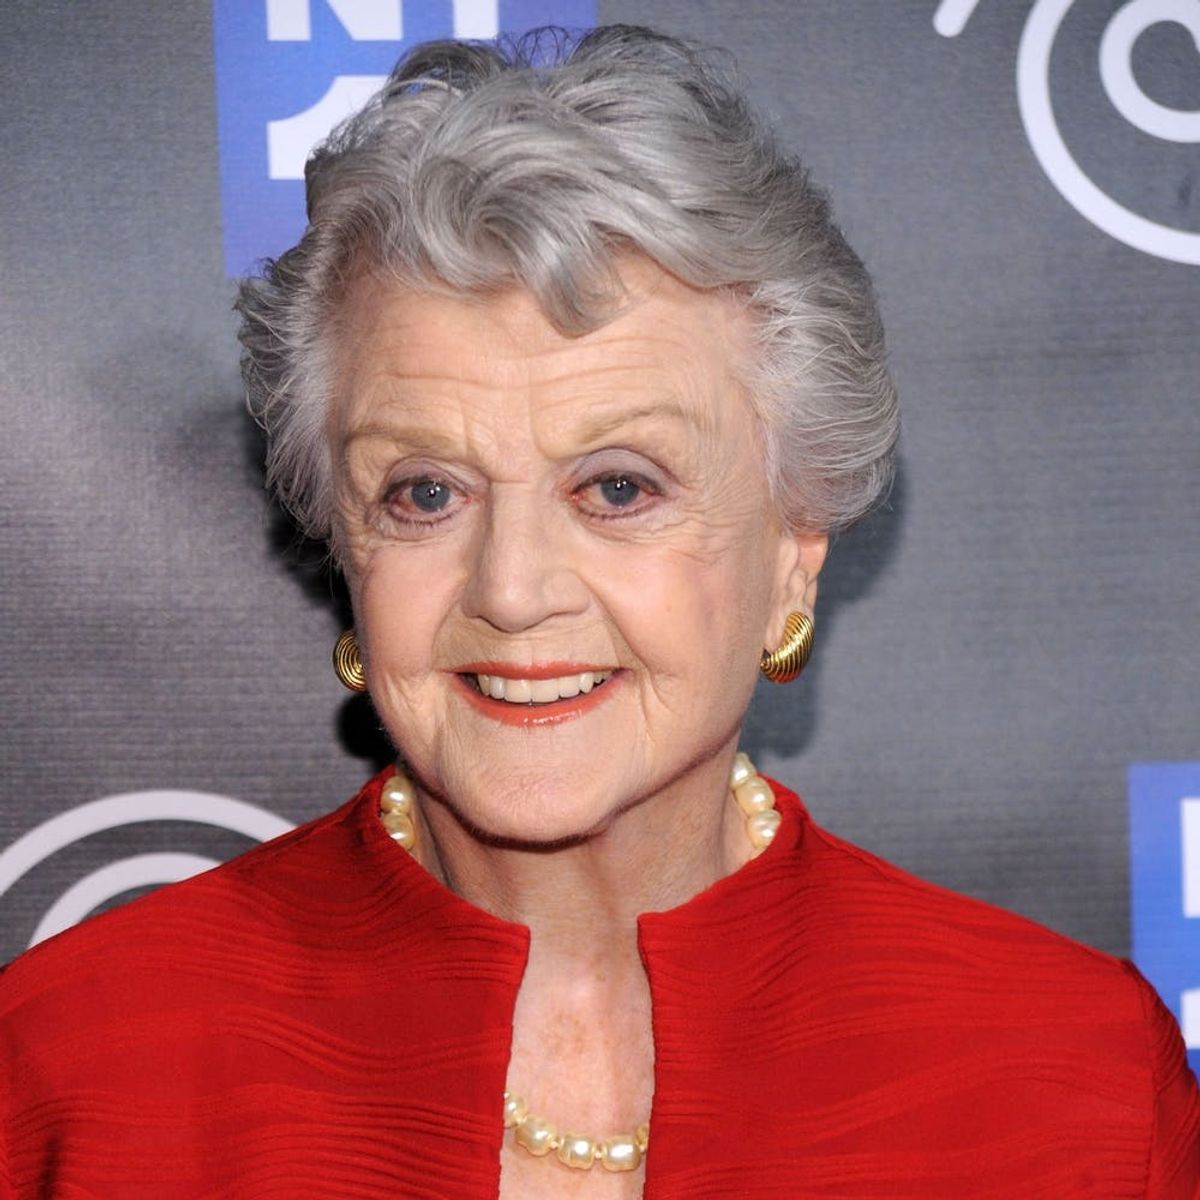 Angela Lansbury Responds to the Backlash Over Her Sexual Harassment Comments